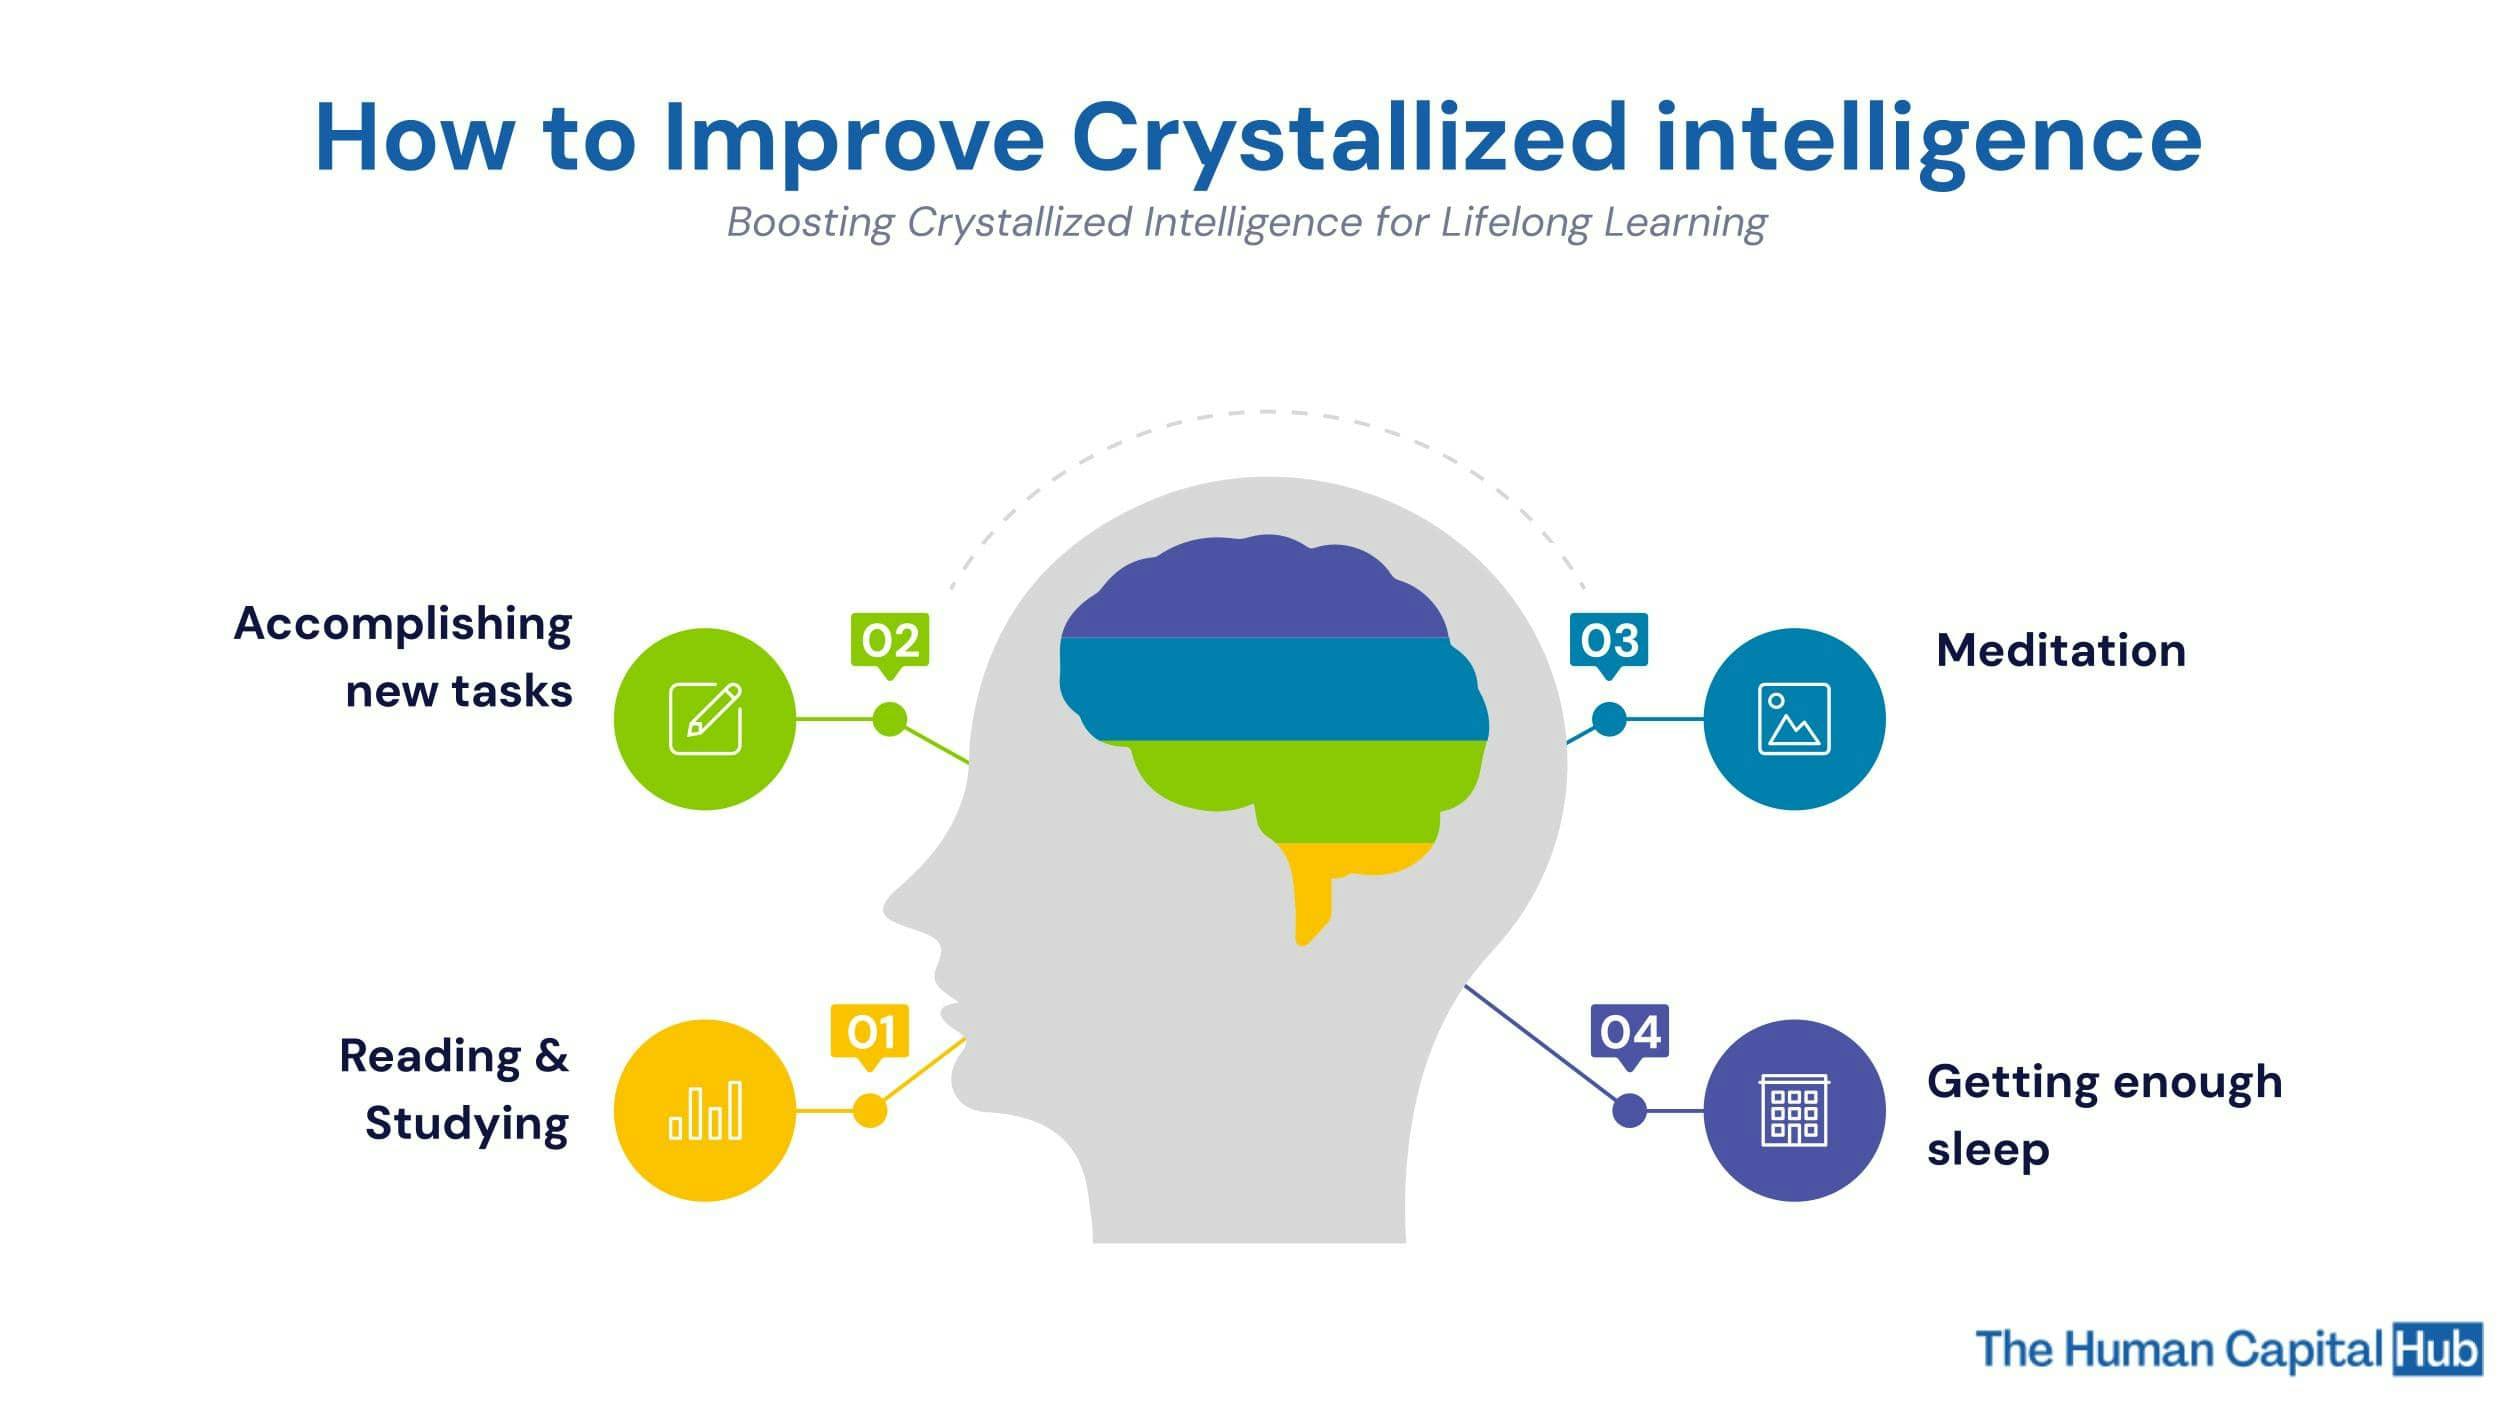 Crystallized intelligence: Everything you need to know